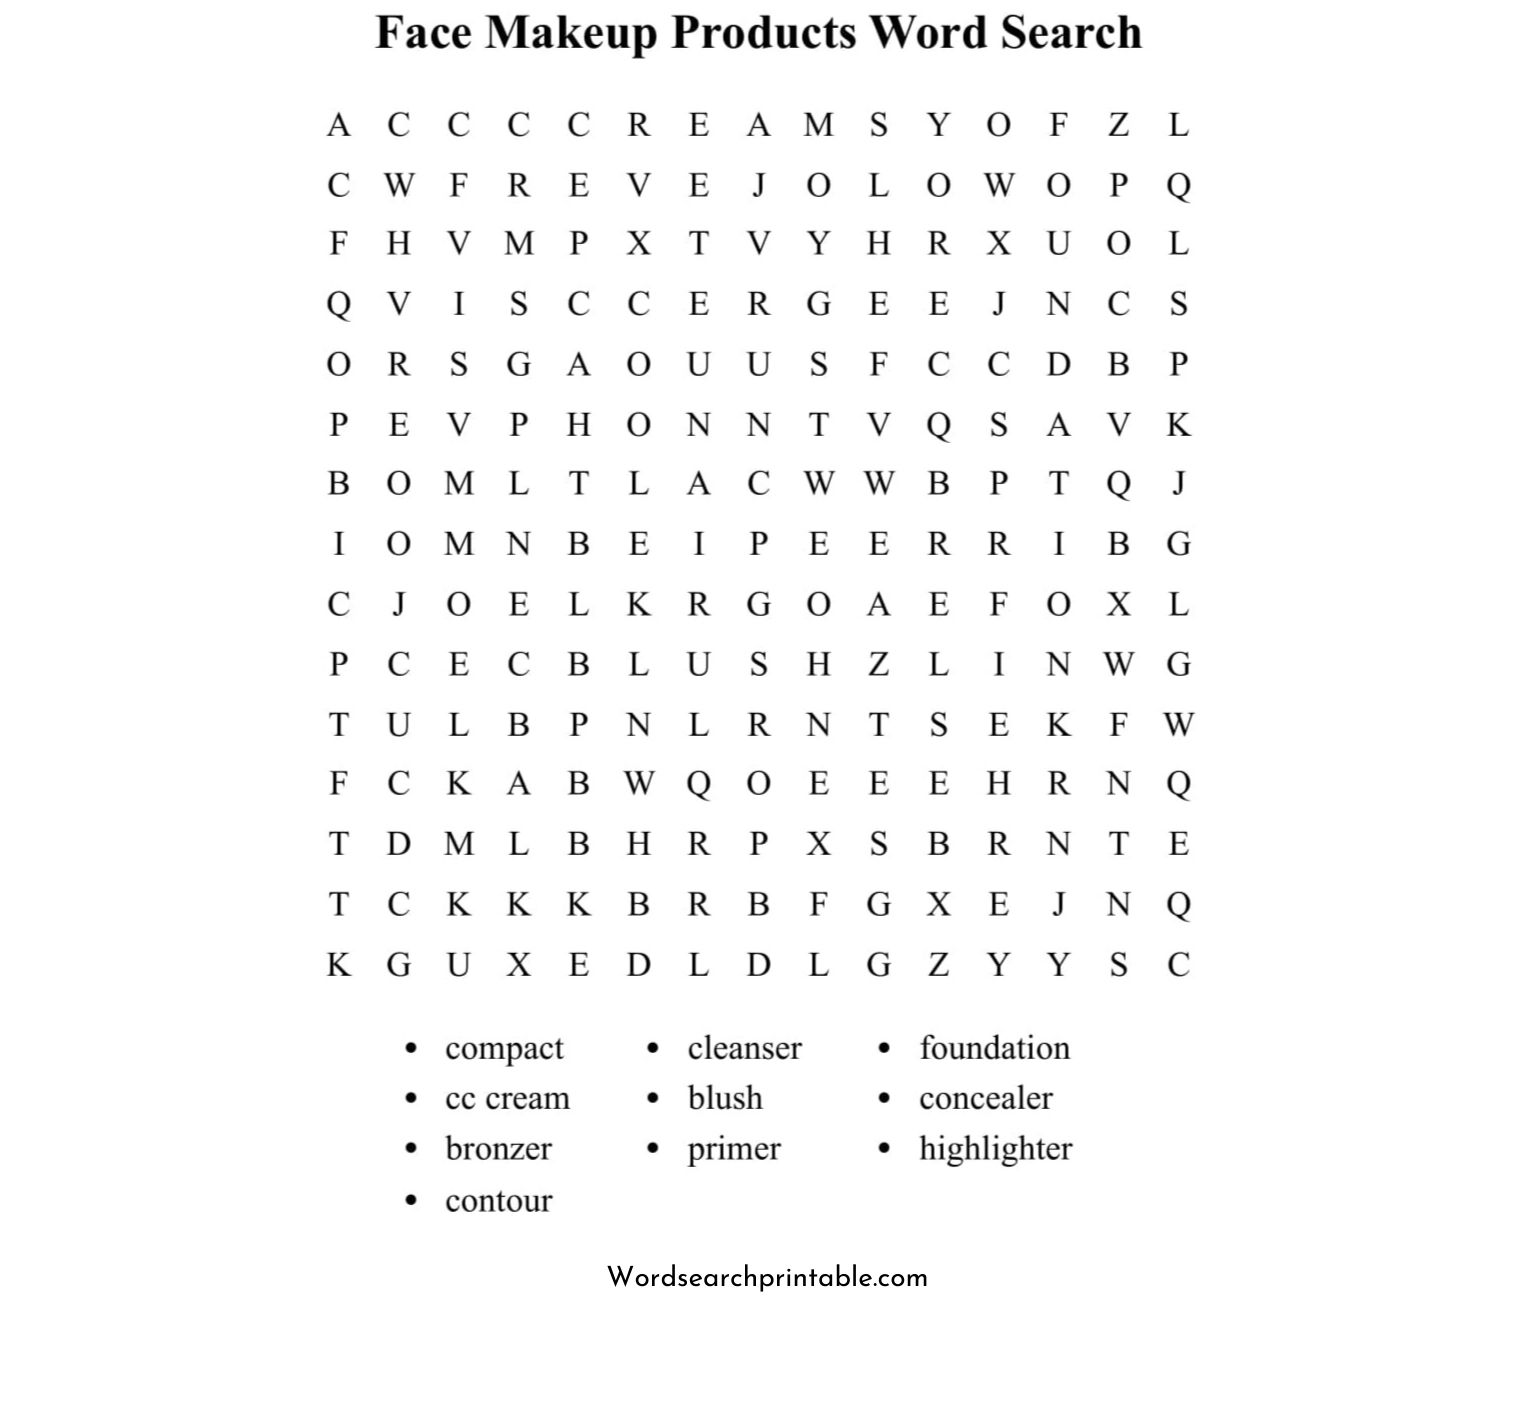 face makeup word search puzzle